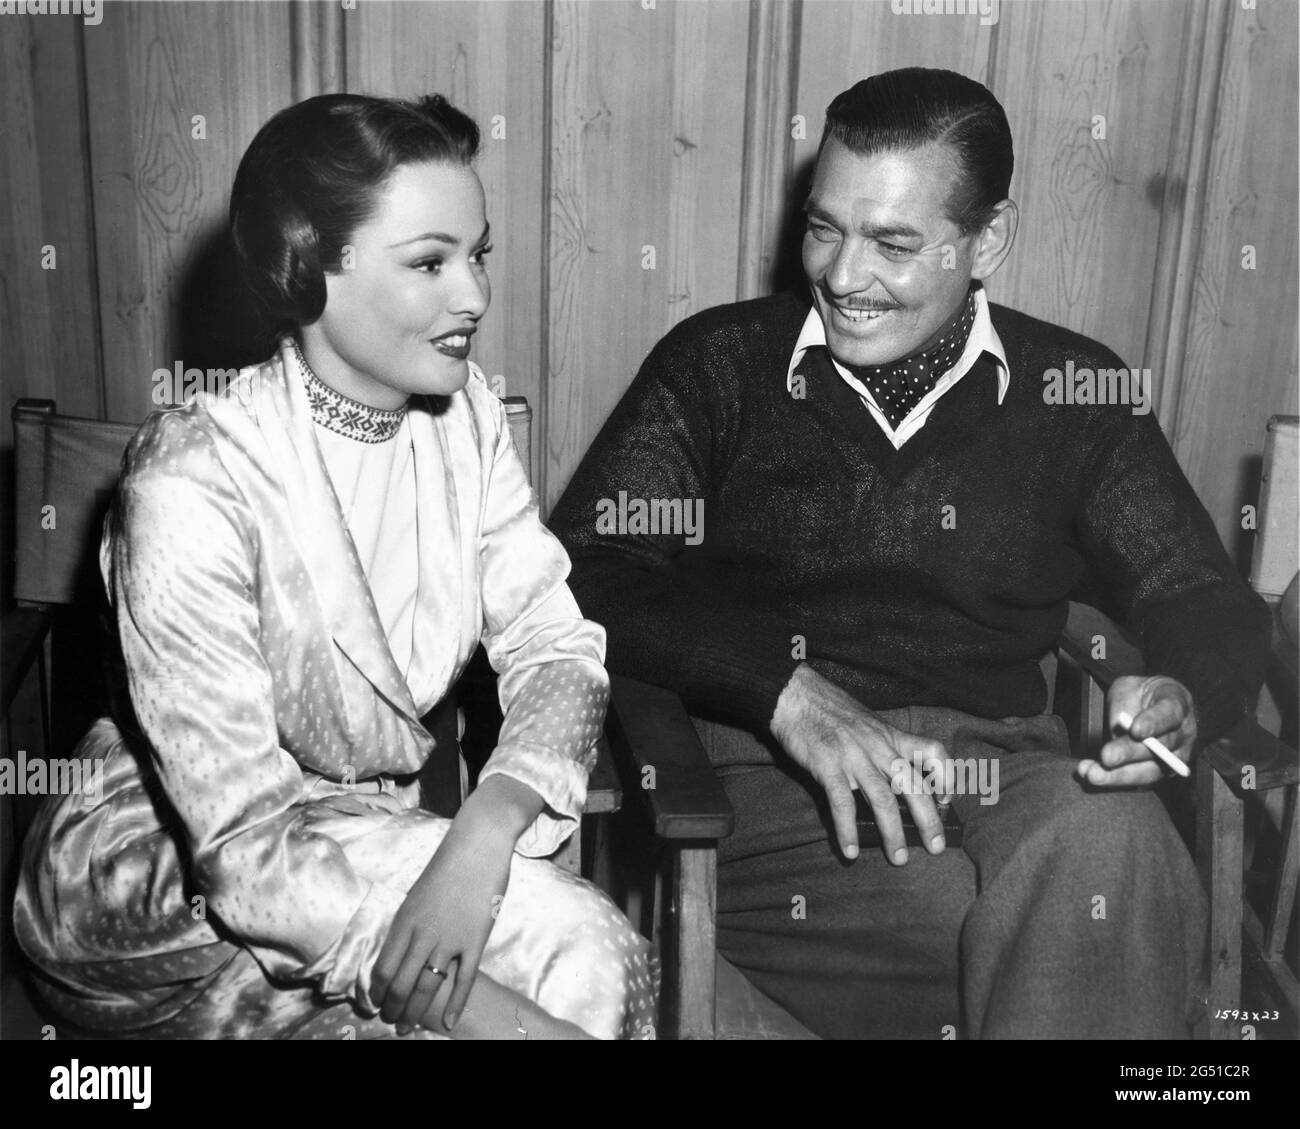 GENE TIERNEY and CLARK GABLE on set candid at MGM British Studios at Boreham Wood during filming of NEVER LET ME GO 1953 director DELMER DAVES from novel Come The Dawn by Paul Winterton producer Clarence Brown Metro Goldwyn Mayer Stock Photo